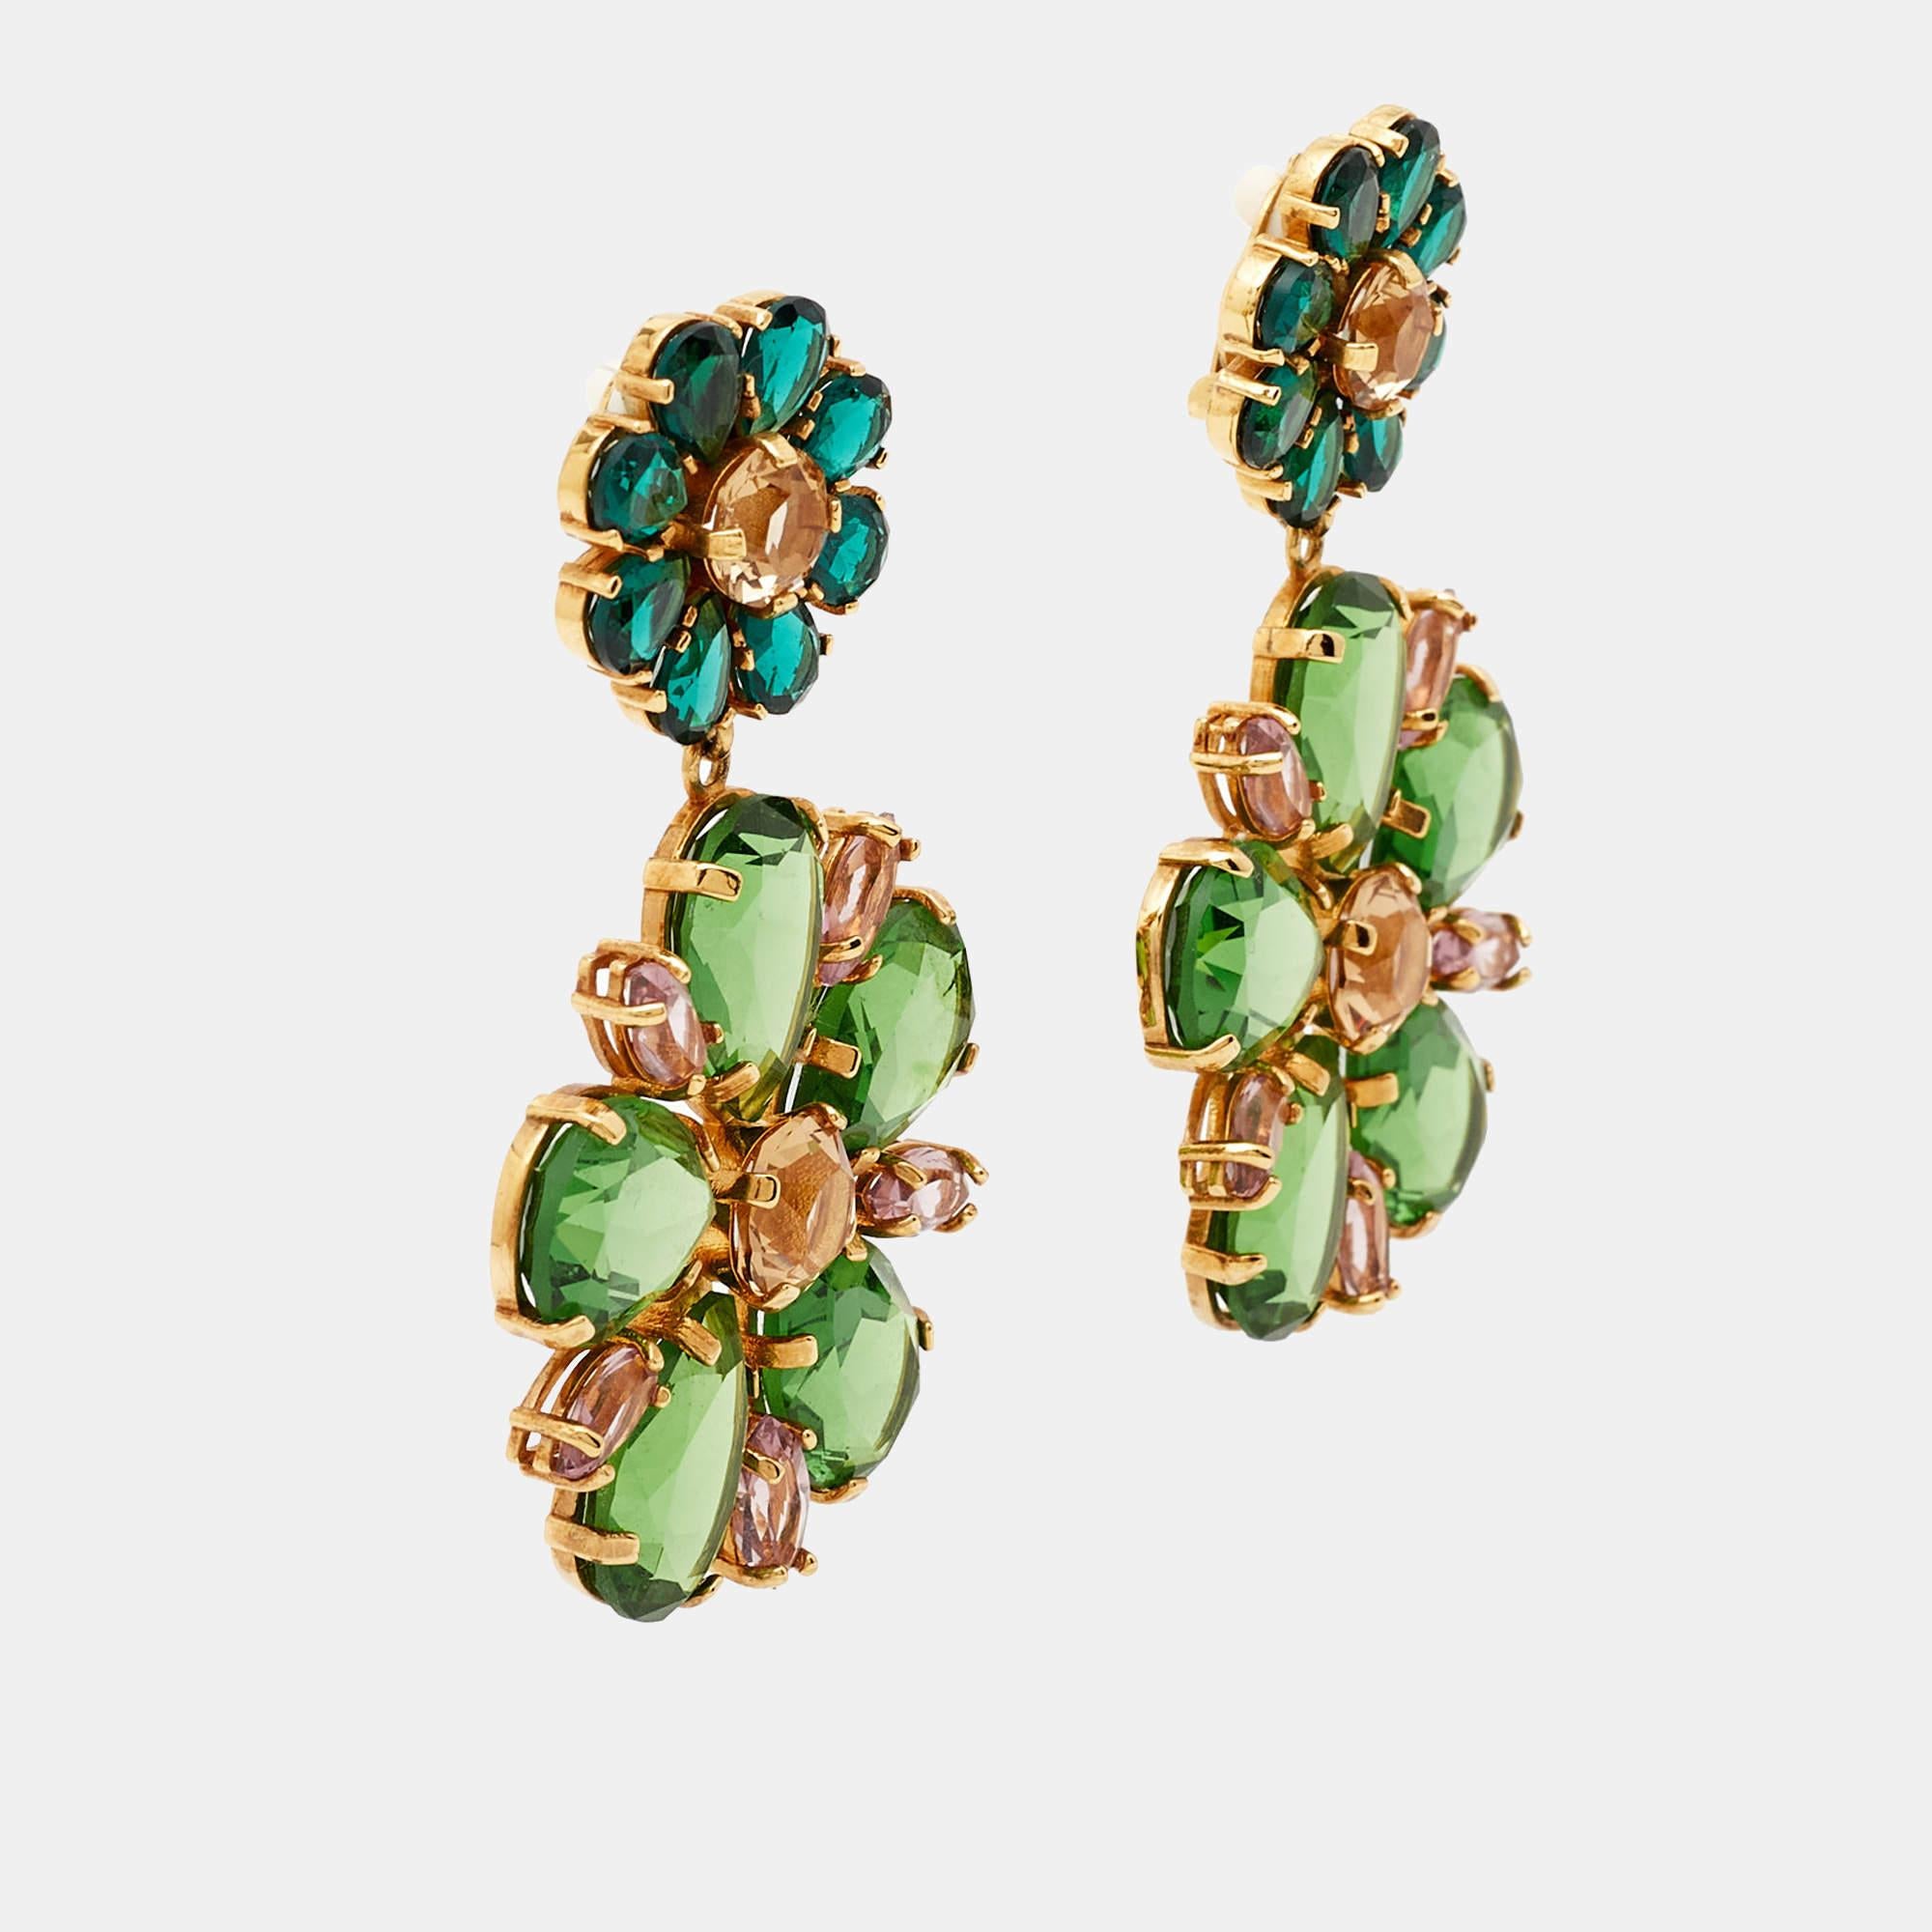 A feminine flair and a chic appeal characterize these stunning Dolce & Gabbana earrings. Sculpted from high-grade materials, they will look beautiful when you style them with your outfits and other accessories.

